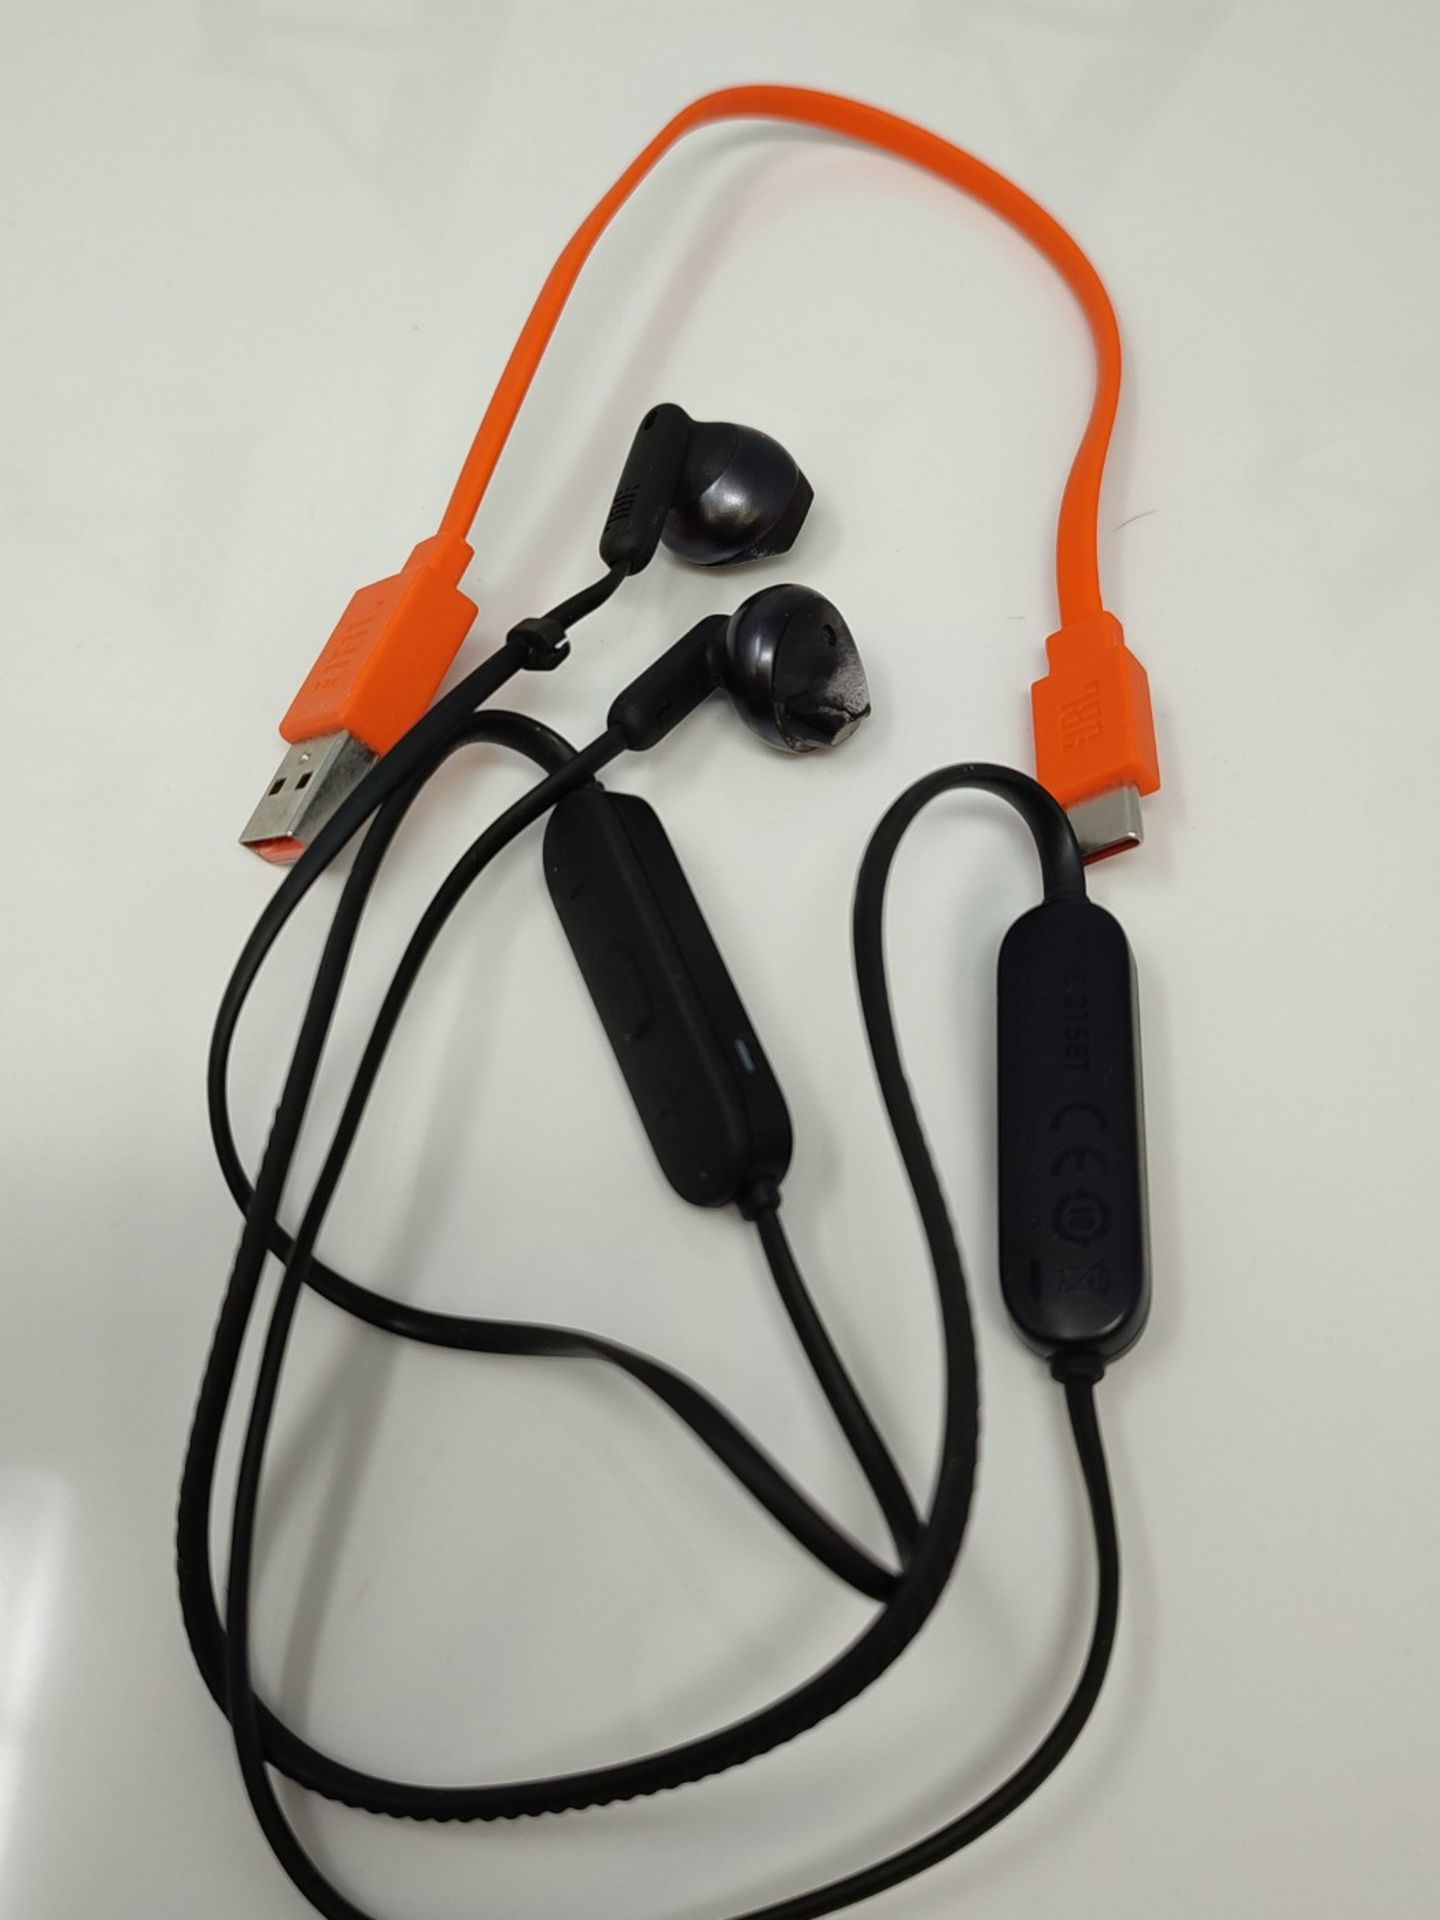 JBL TUNE 215BT Wireless Earbuds, Bluetooth 5.0 Earphone, with Integrated Microphone, H - Image 3 of 3